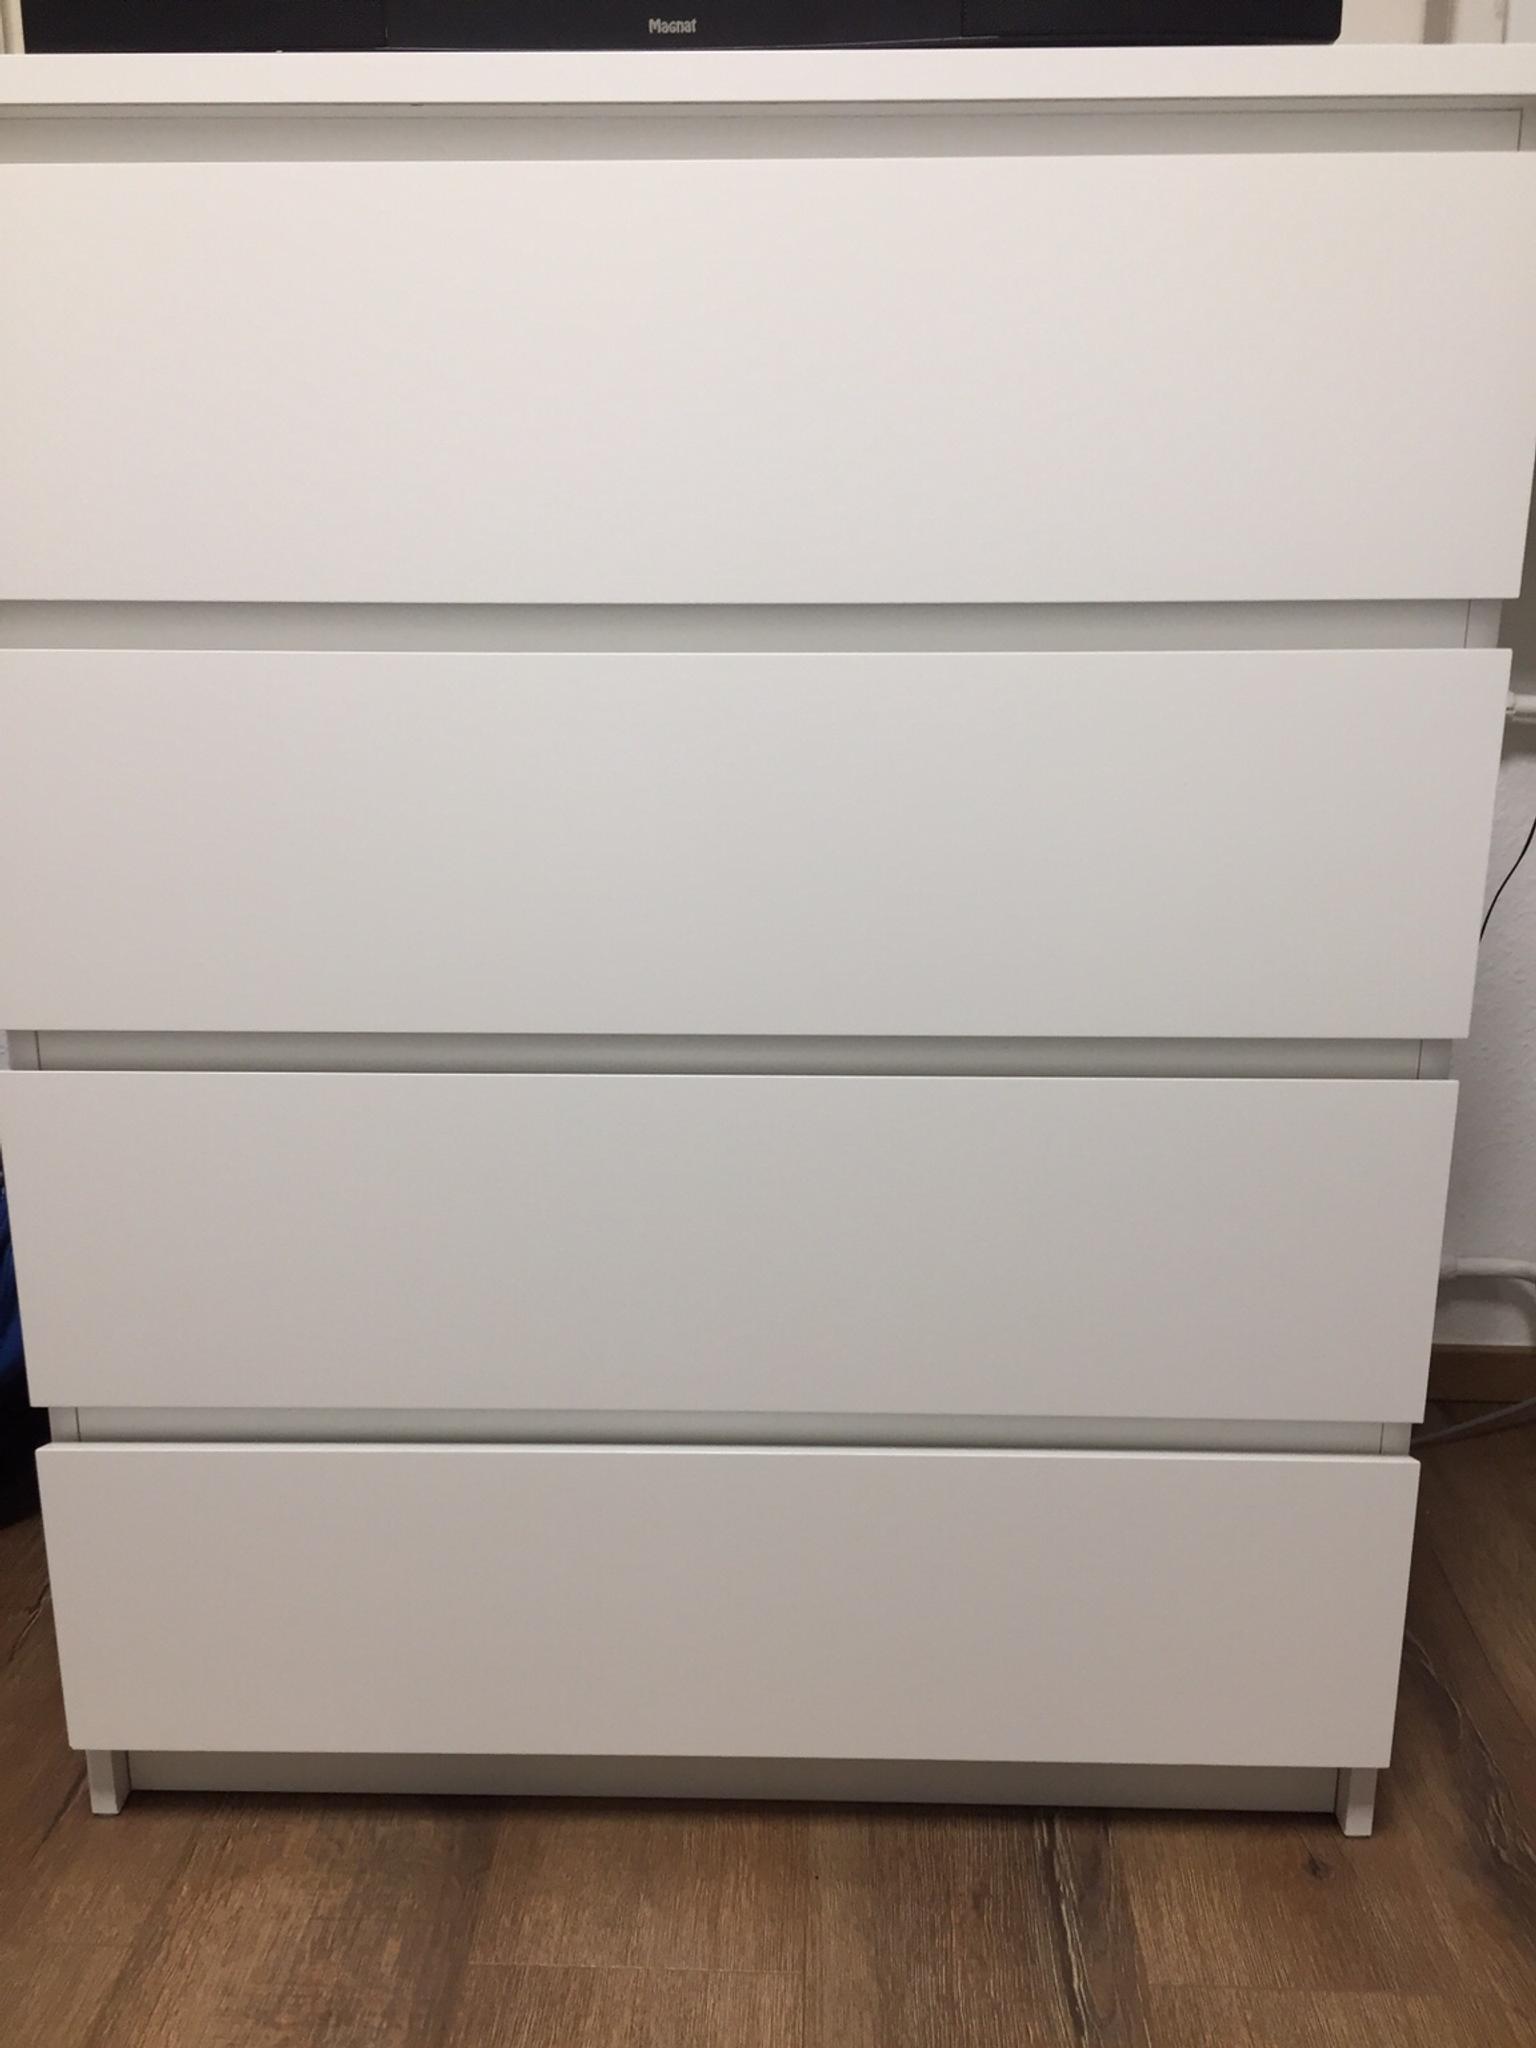 Ikea Pax Kommode In 51069 Koln For 40 00 For Sale Shpock